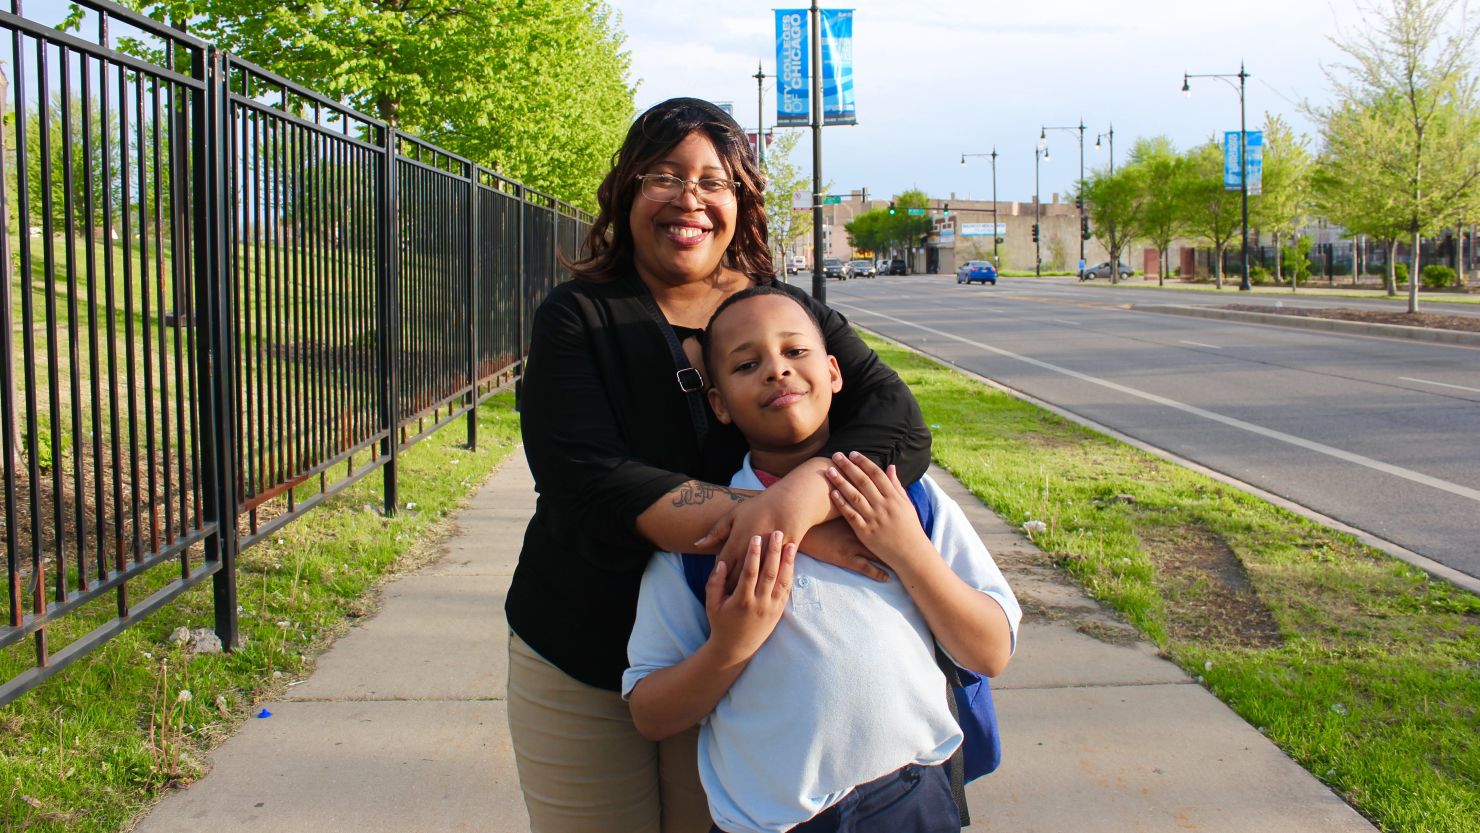 Rachel Norwood and her son, Justice Watkins, on their way home from his school.